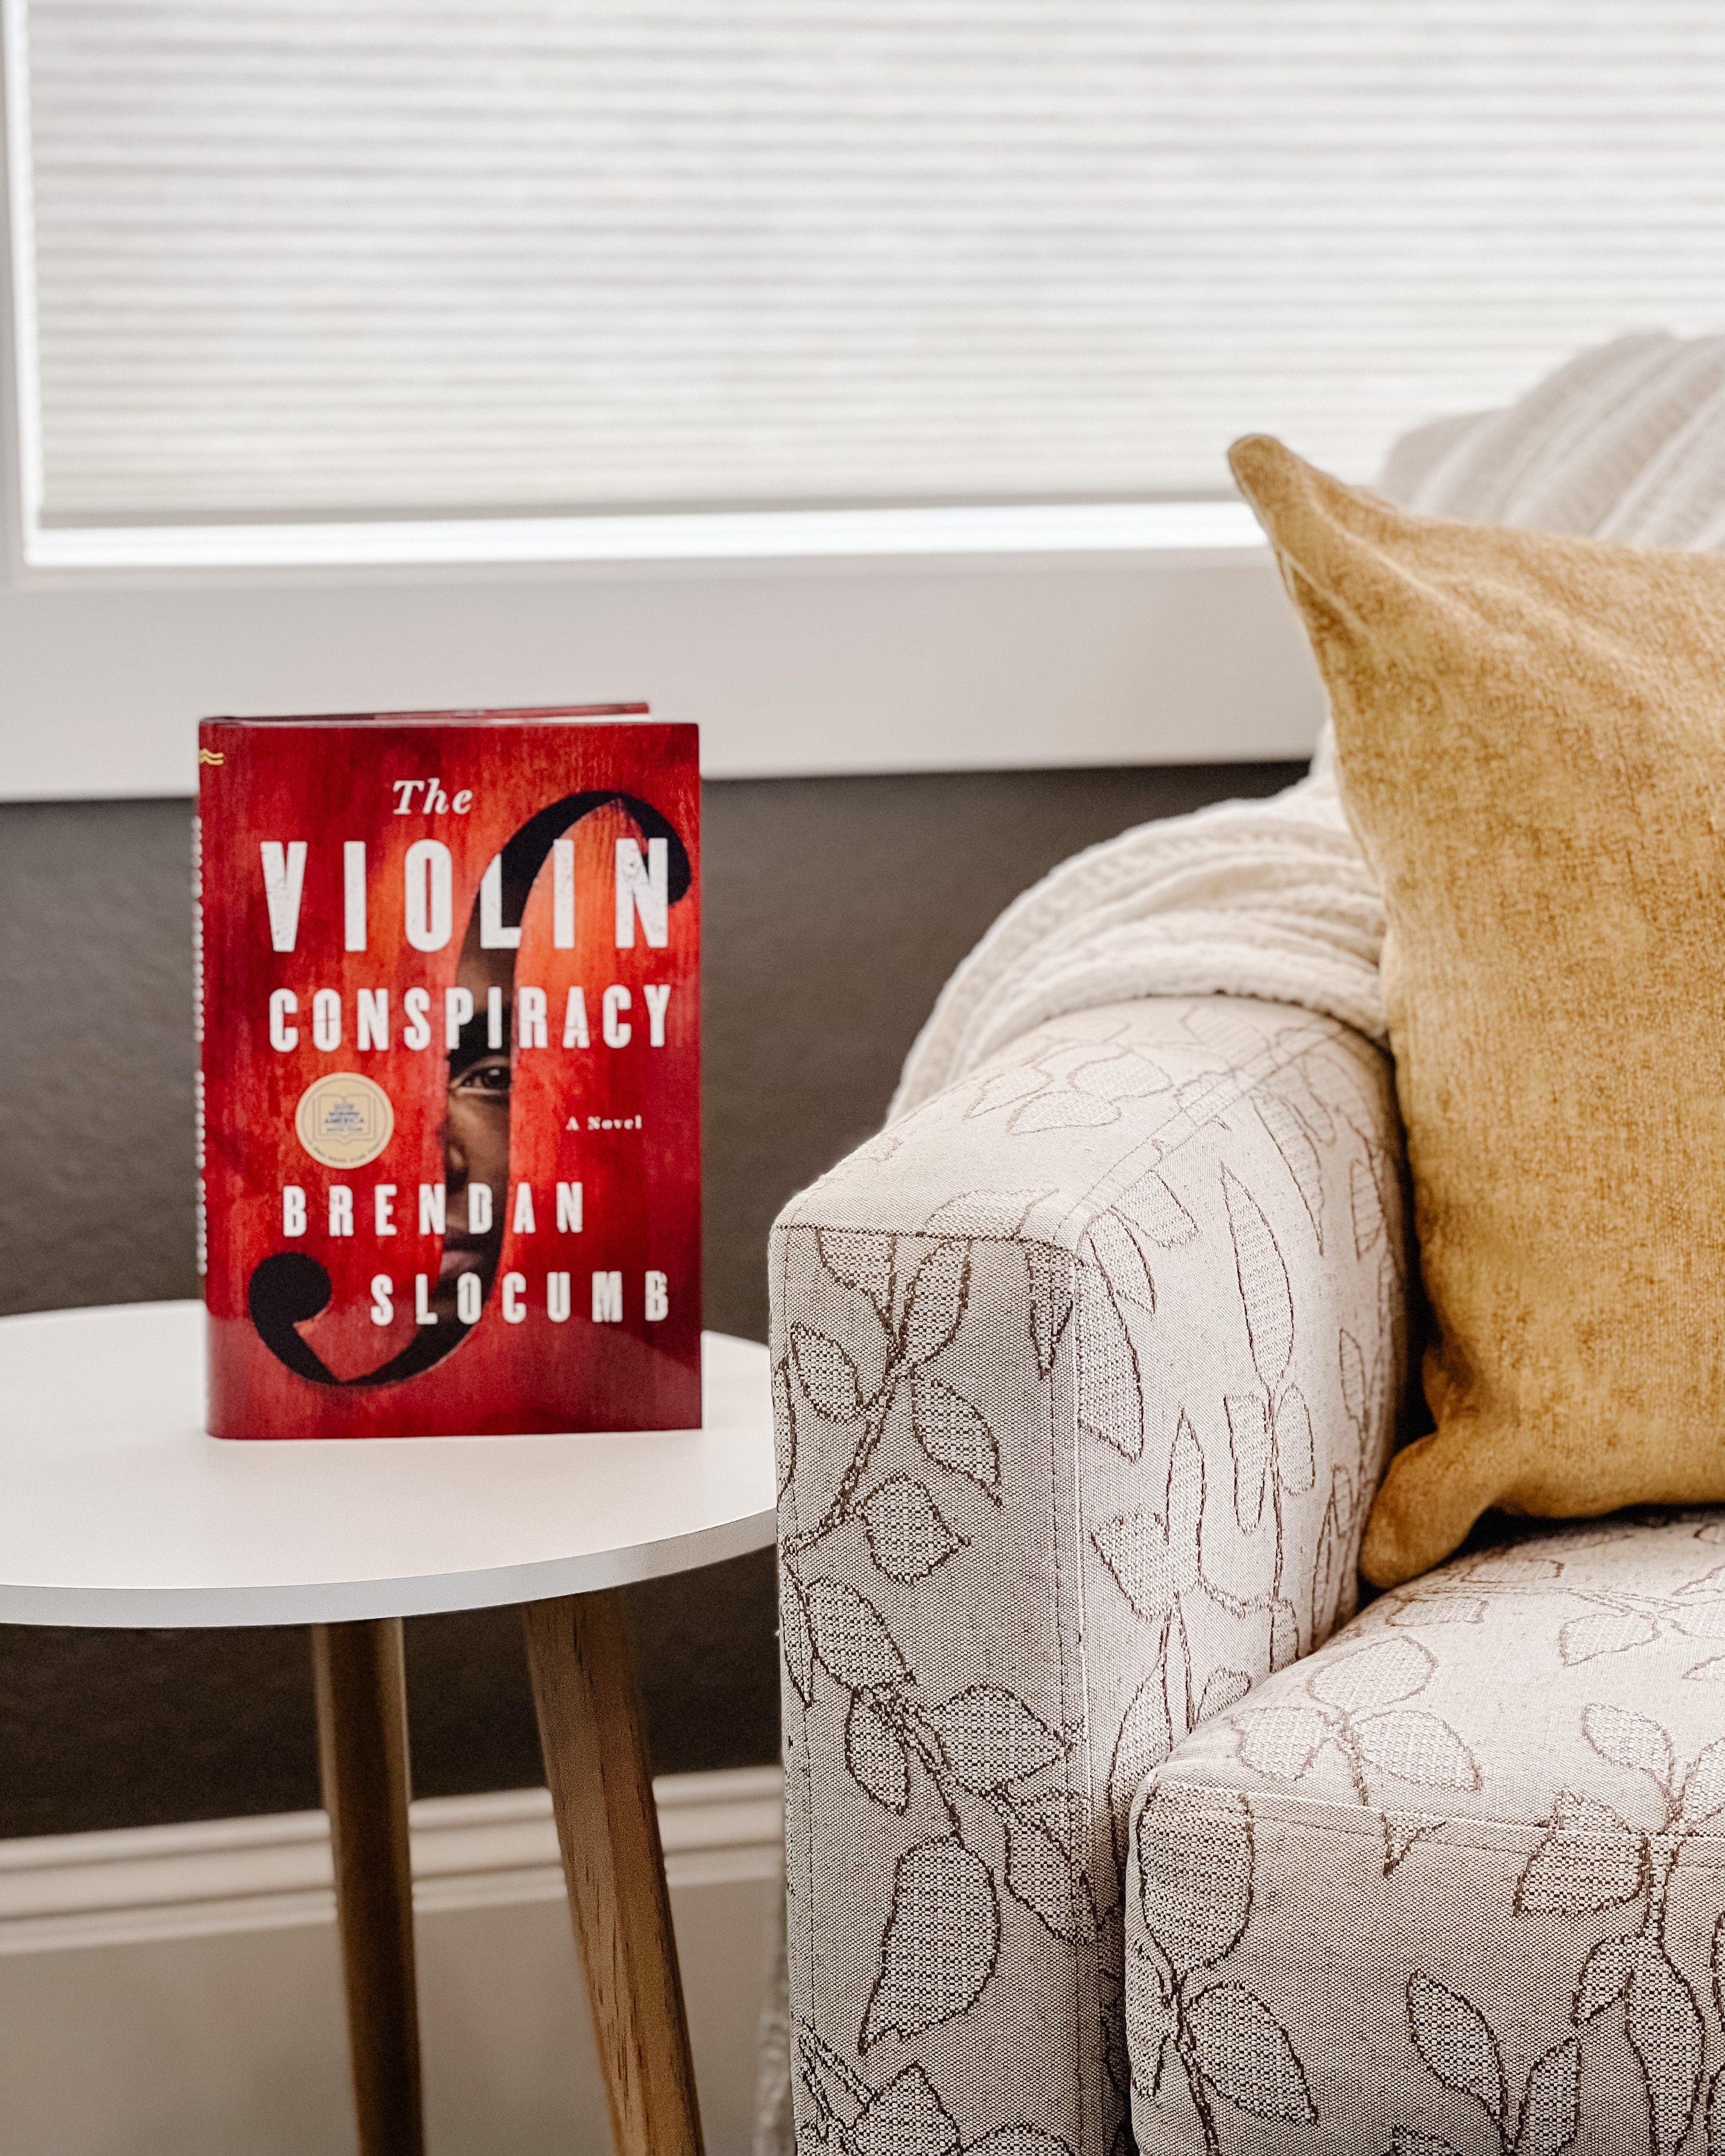 Friday Reads - The Violin Conspiracy